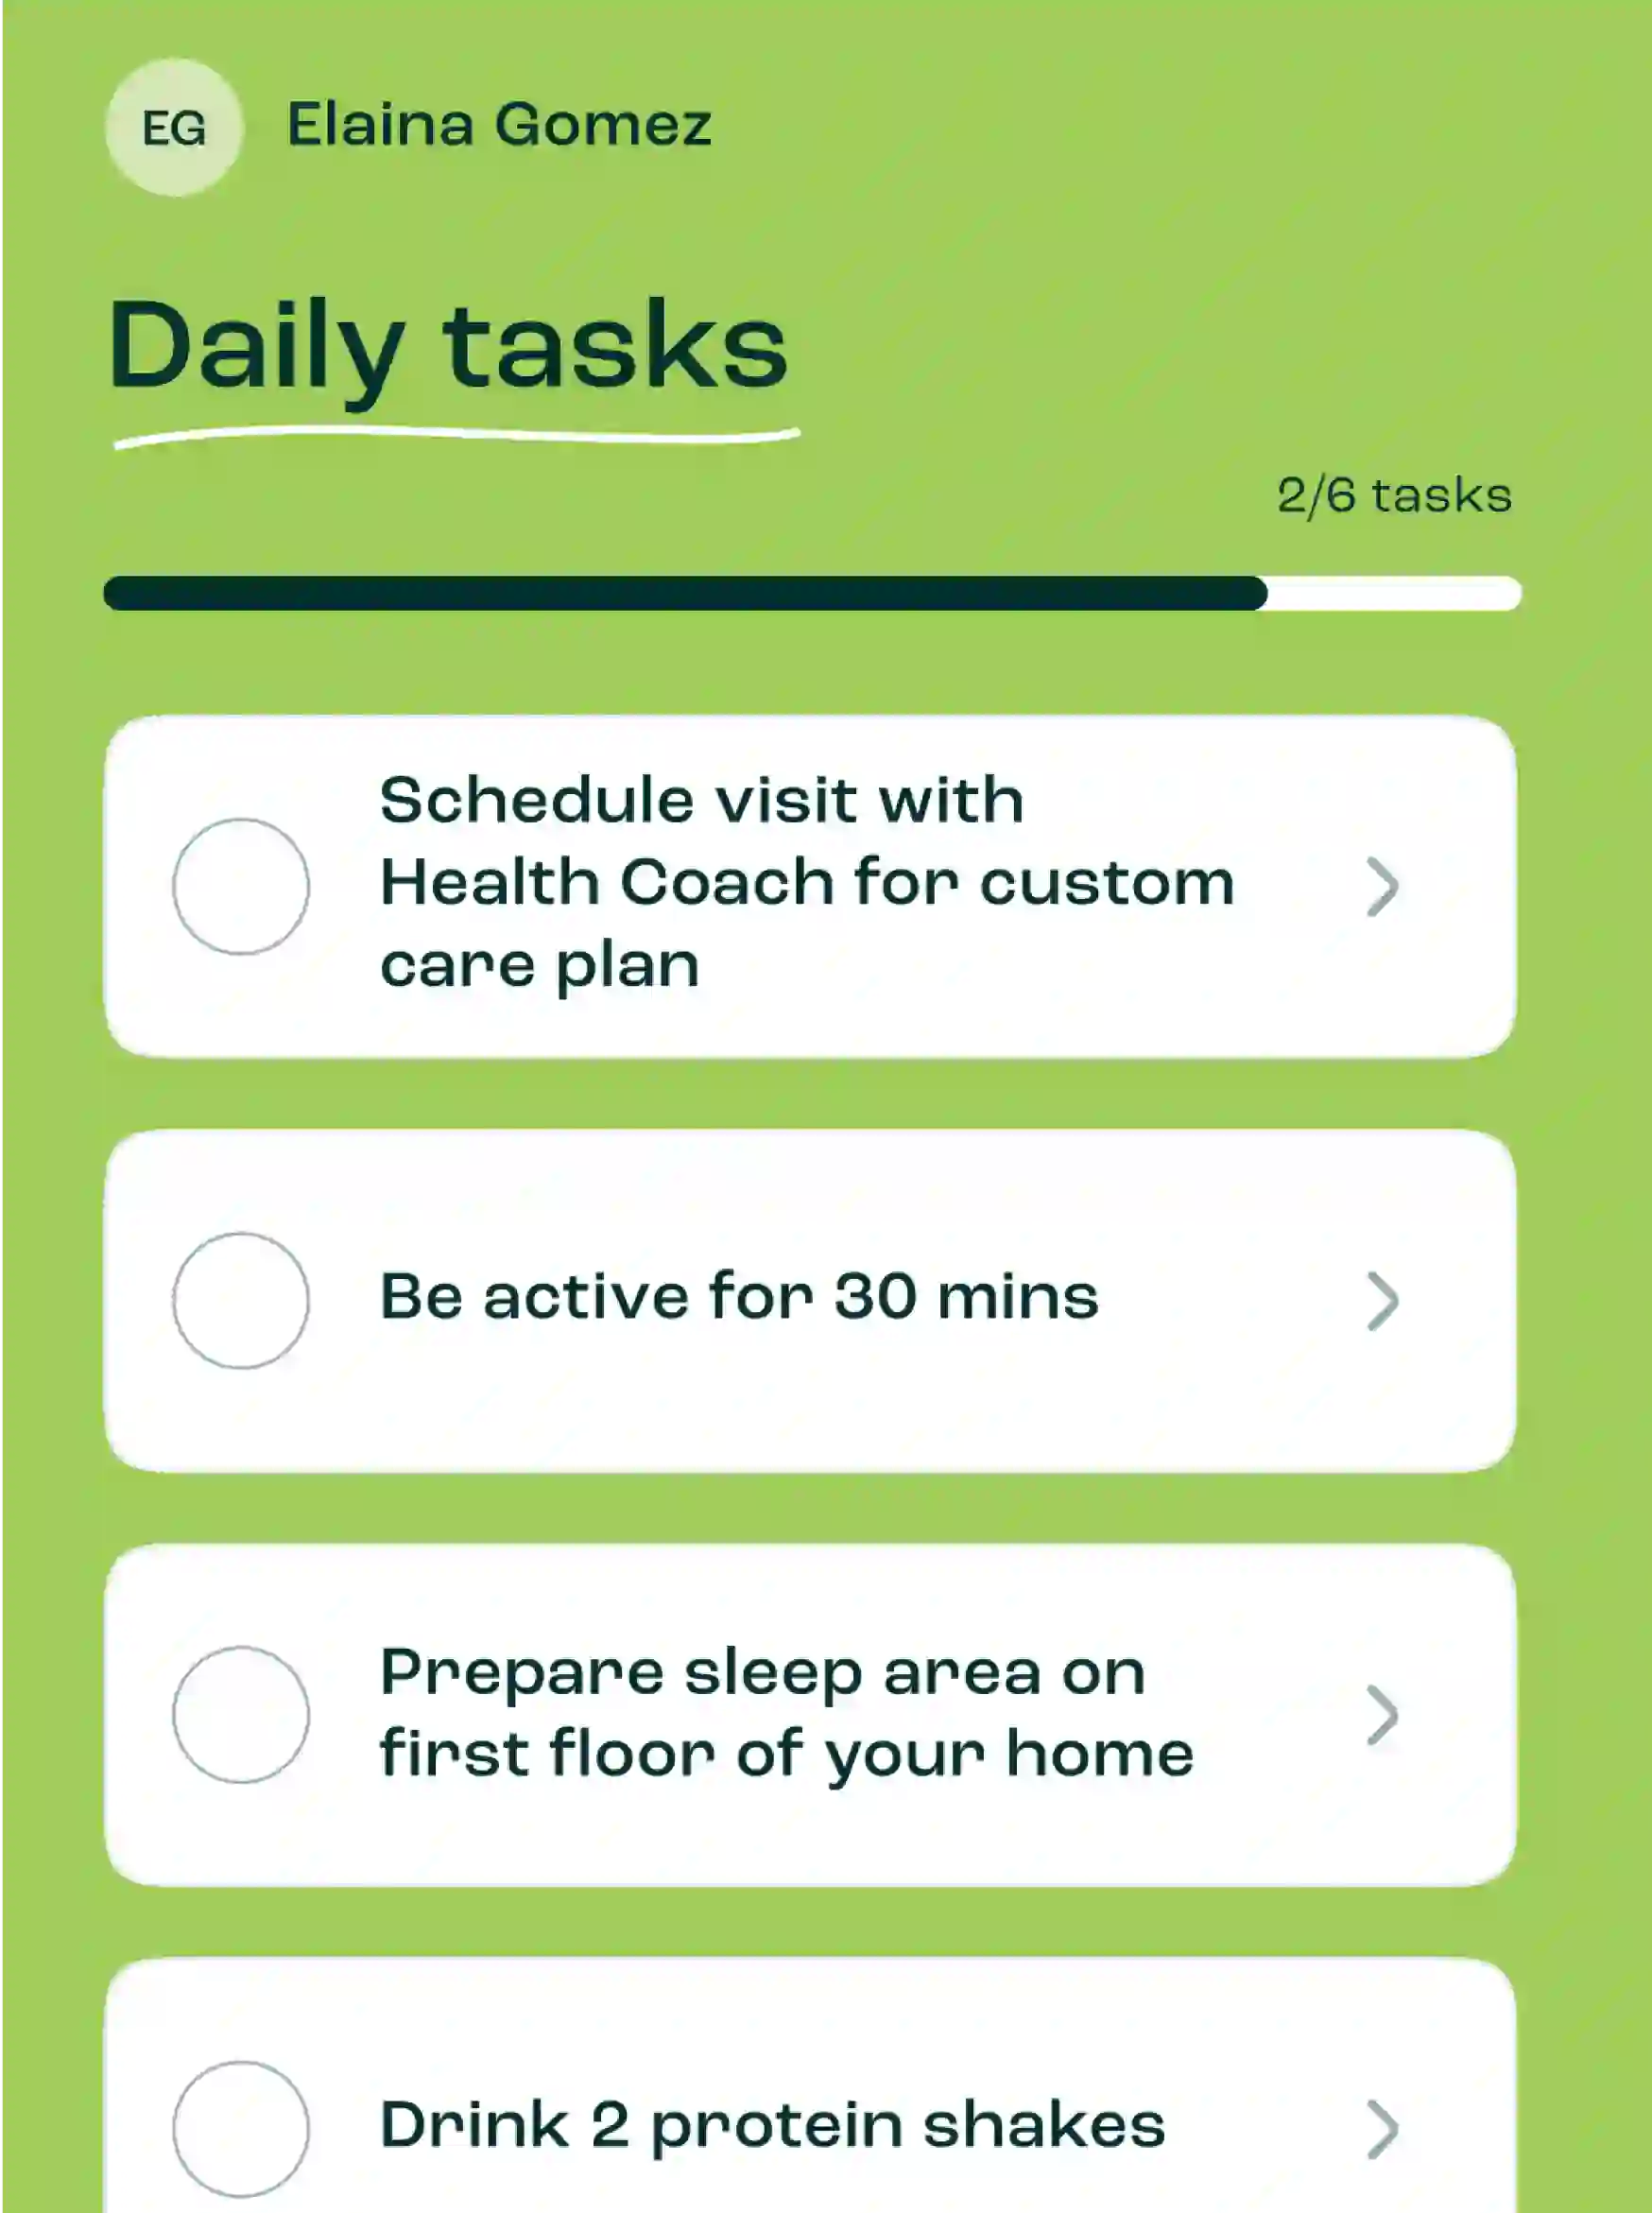 Pipcare app with an avatar on the top left with initials EG and the name Elaina Gomez written next to it. Below it is a list titled "Daily Tasks" where 2 out of 6 tasks are completed. The list shows three unfinished tasks. The first task says, "Schedule visit with Health Coach for custom care plan". The second task says, "Be active for 30 minutes". The third task says, "Prepare sleep area on first floor of your home". 